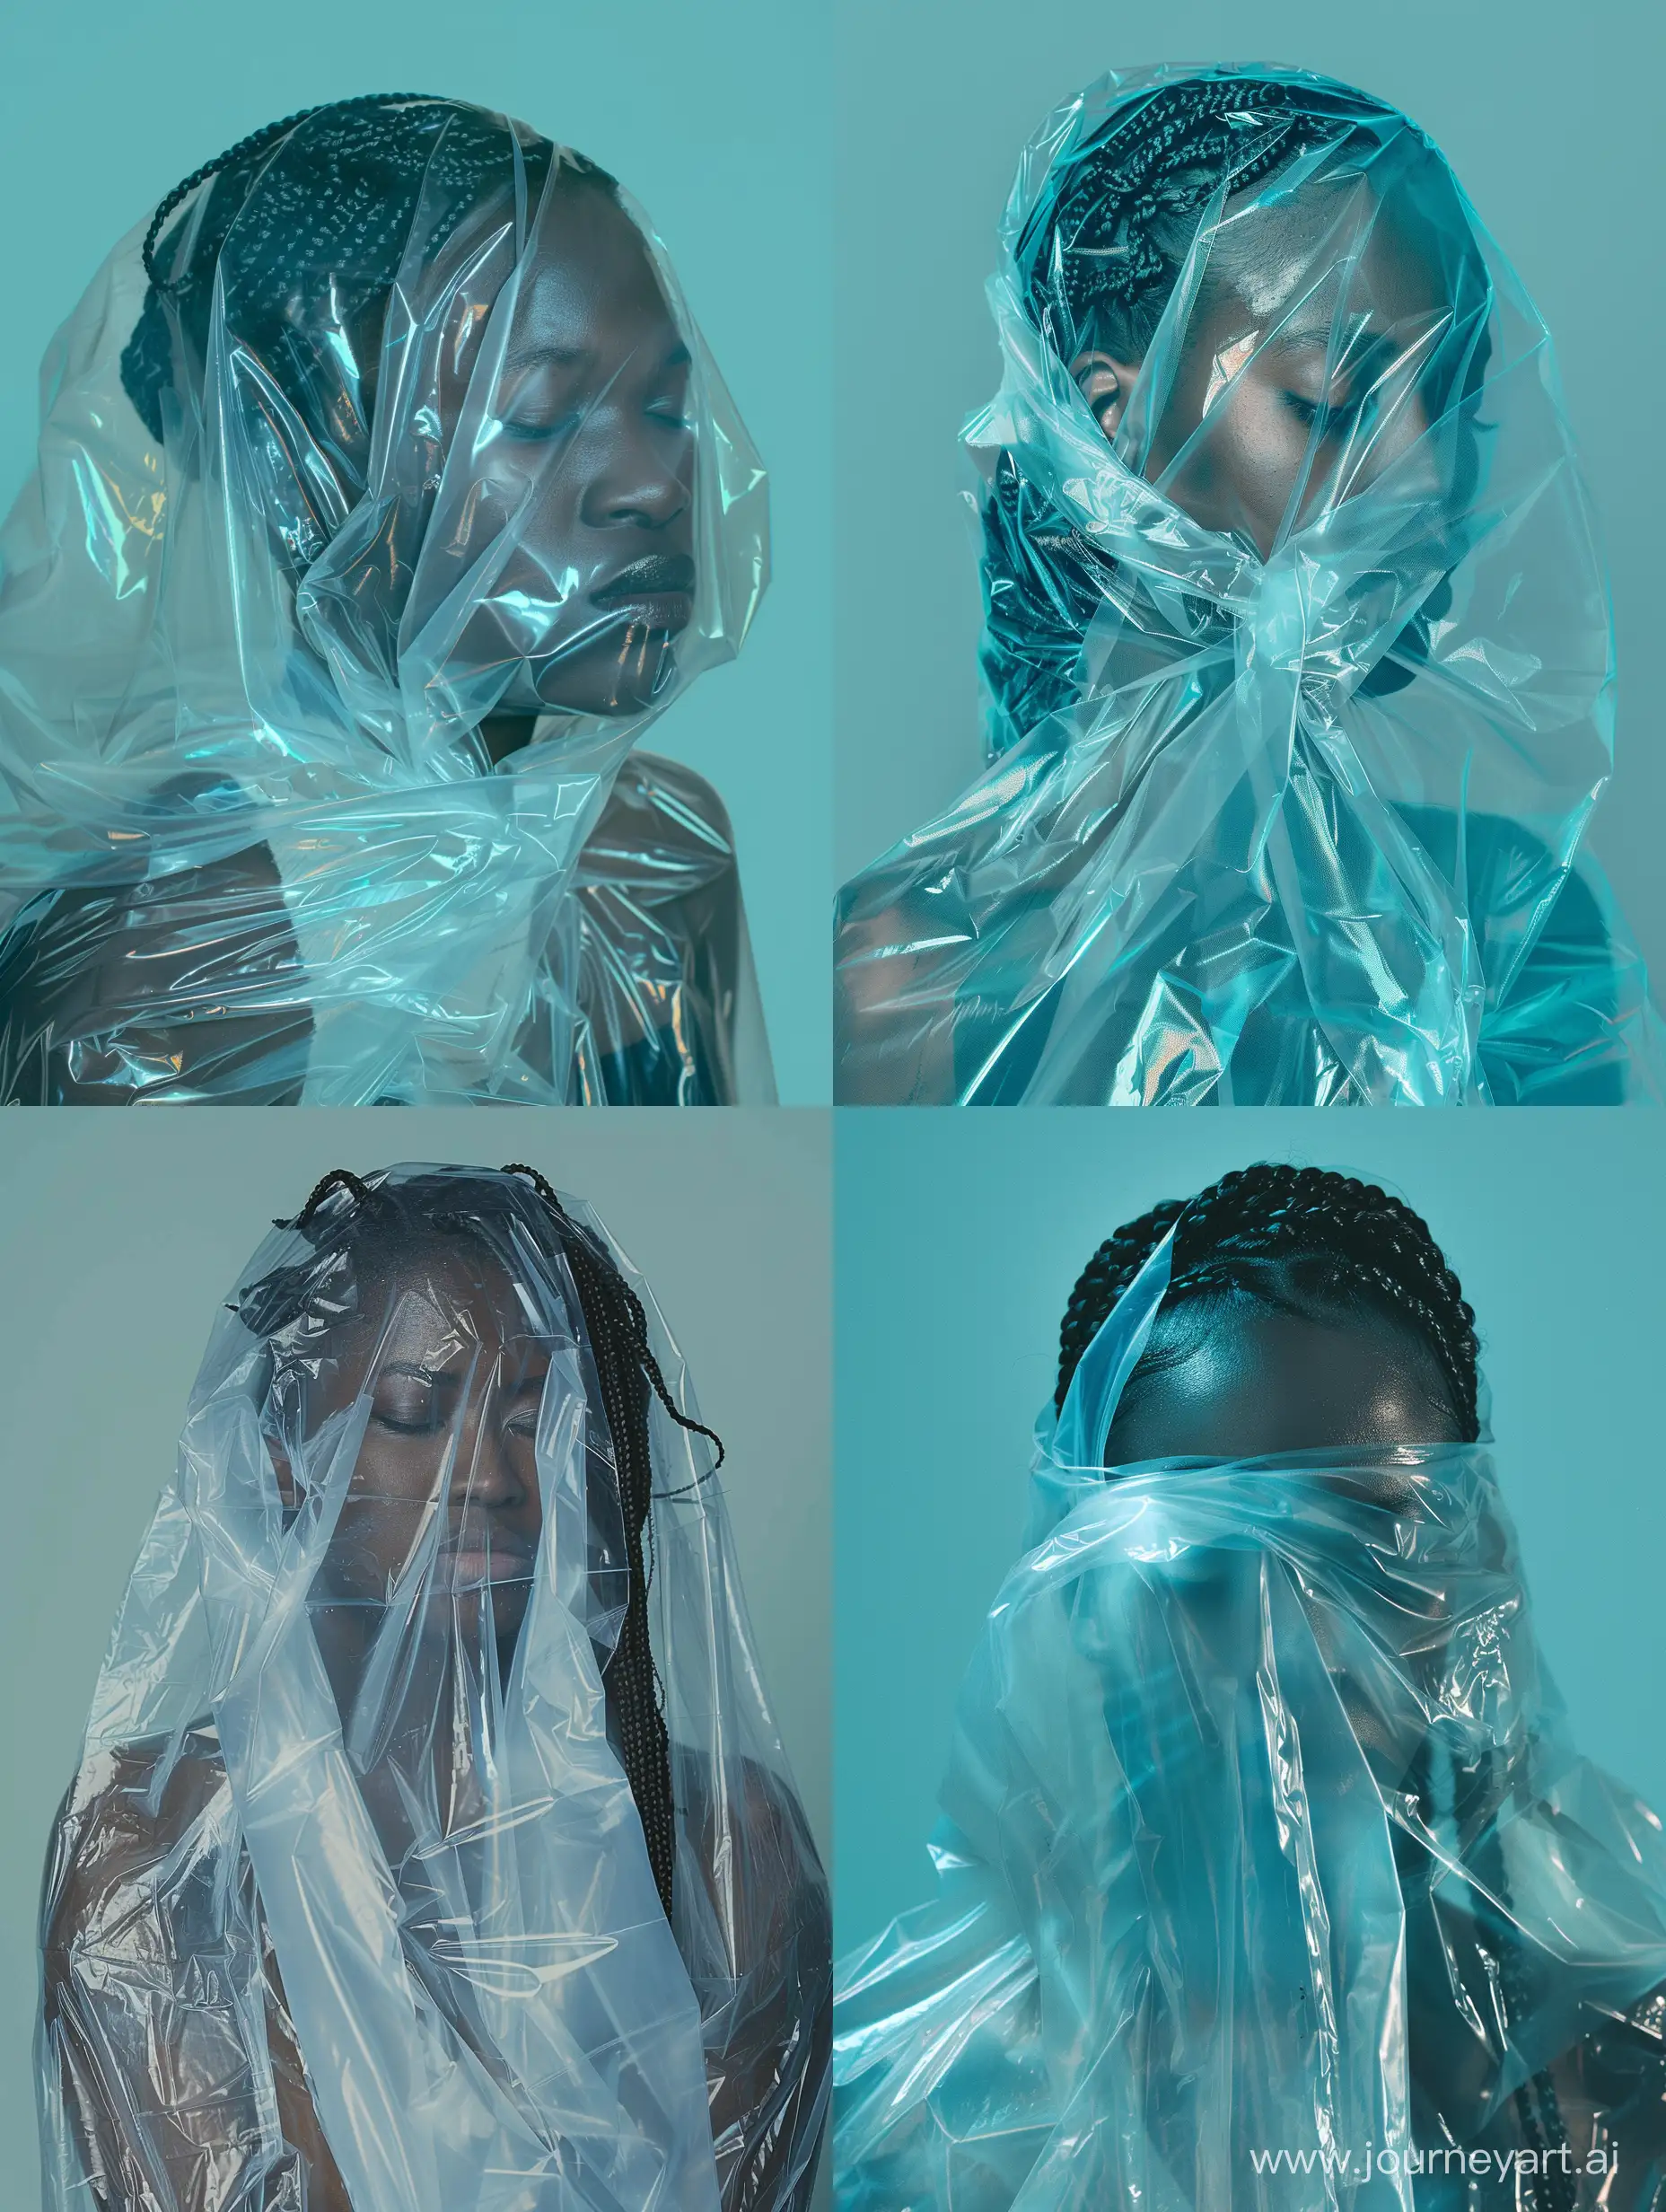 African woman covered in a clear draped plastic bag. Her front  is facing the camera with her eyes closed  and she has braided hair. The background is cyan in color.